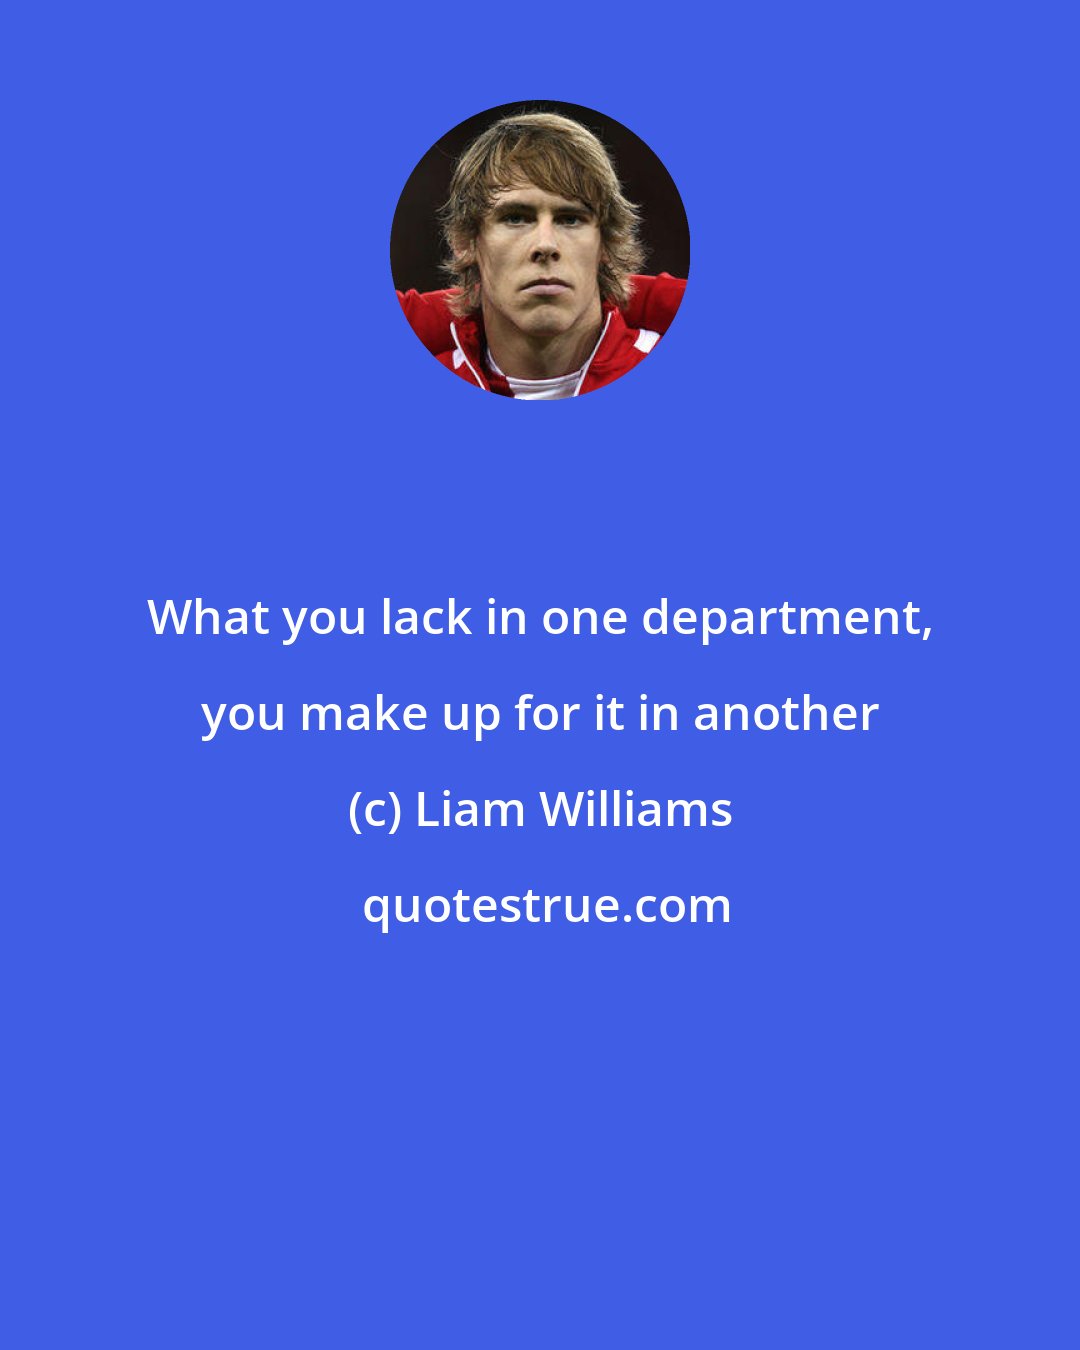 Liam Williams: What you lack in one department, you make up for it in another